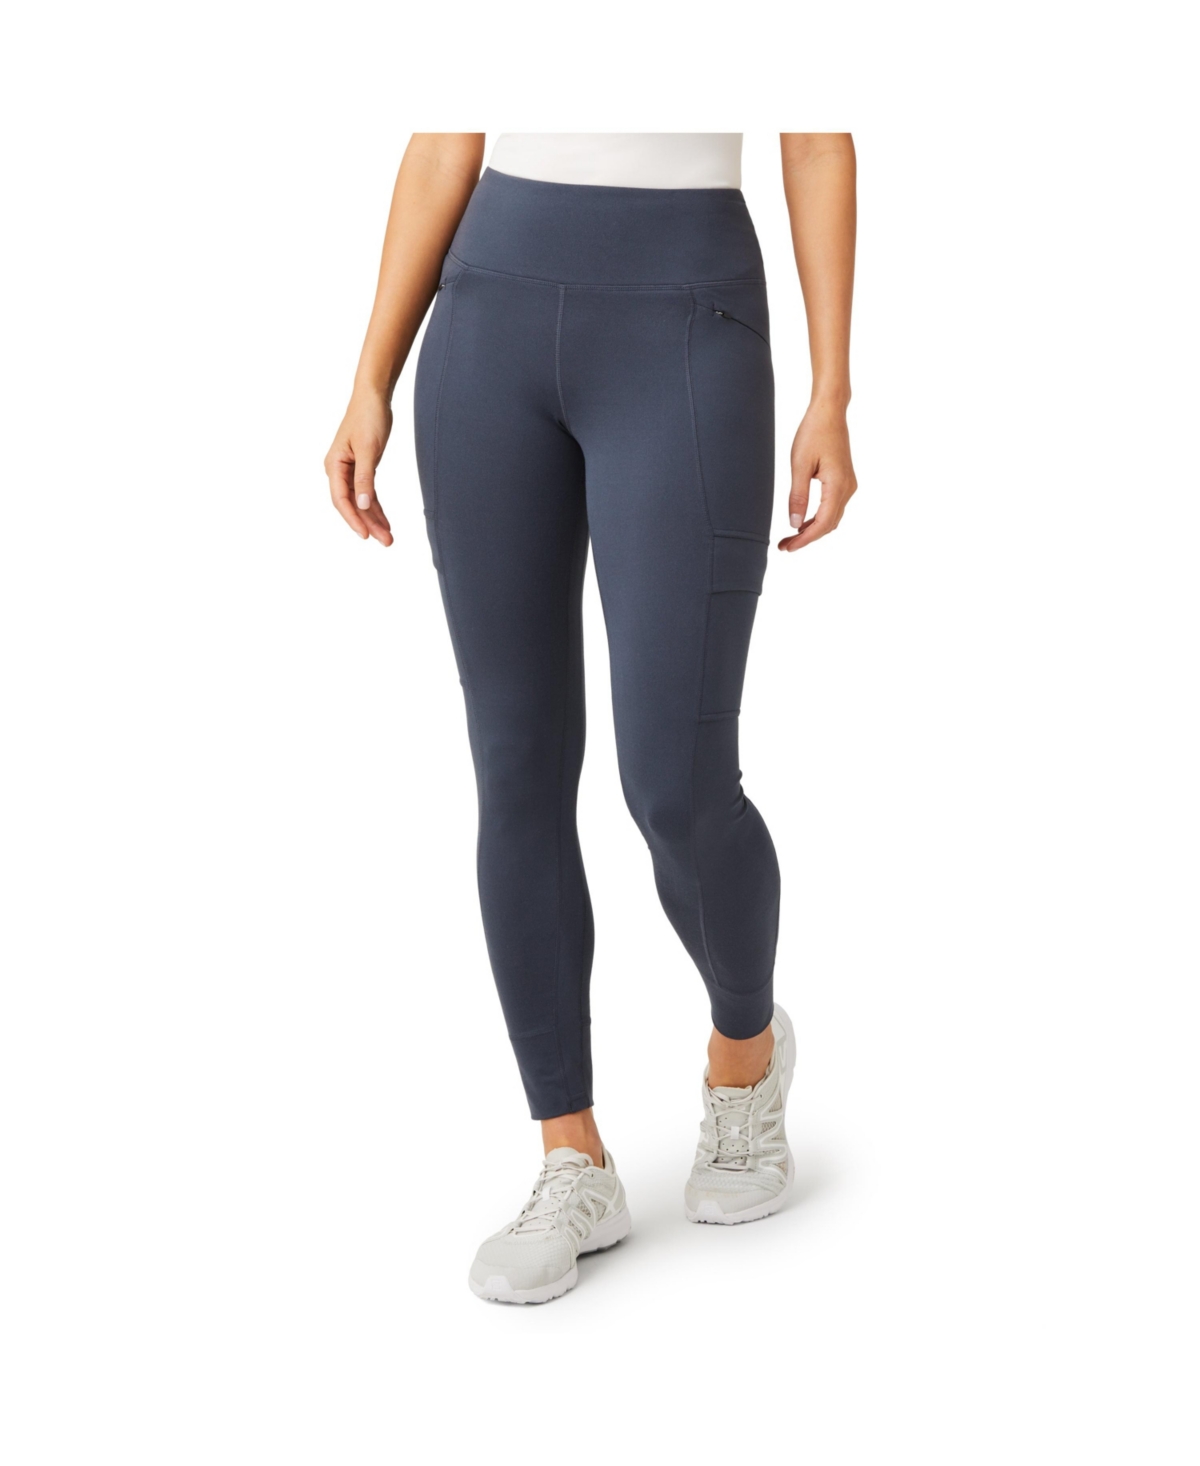 Women's Get Out There Trail Tights - Laurel